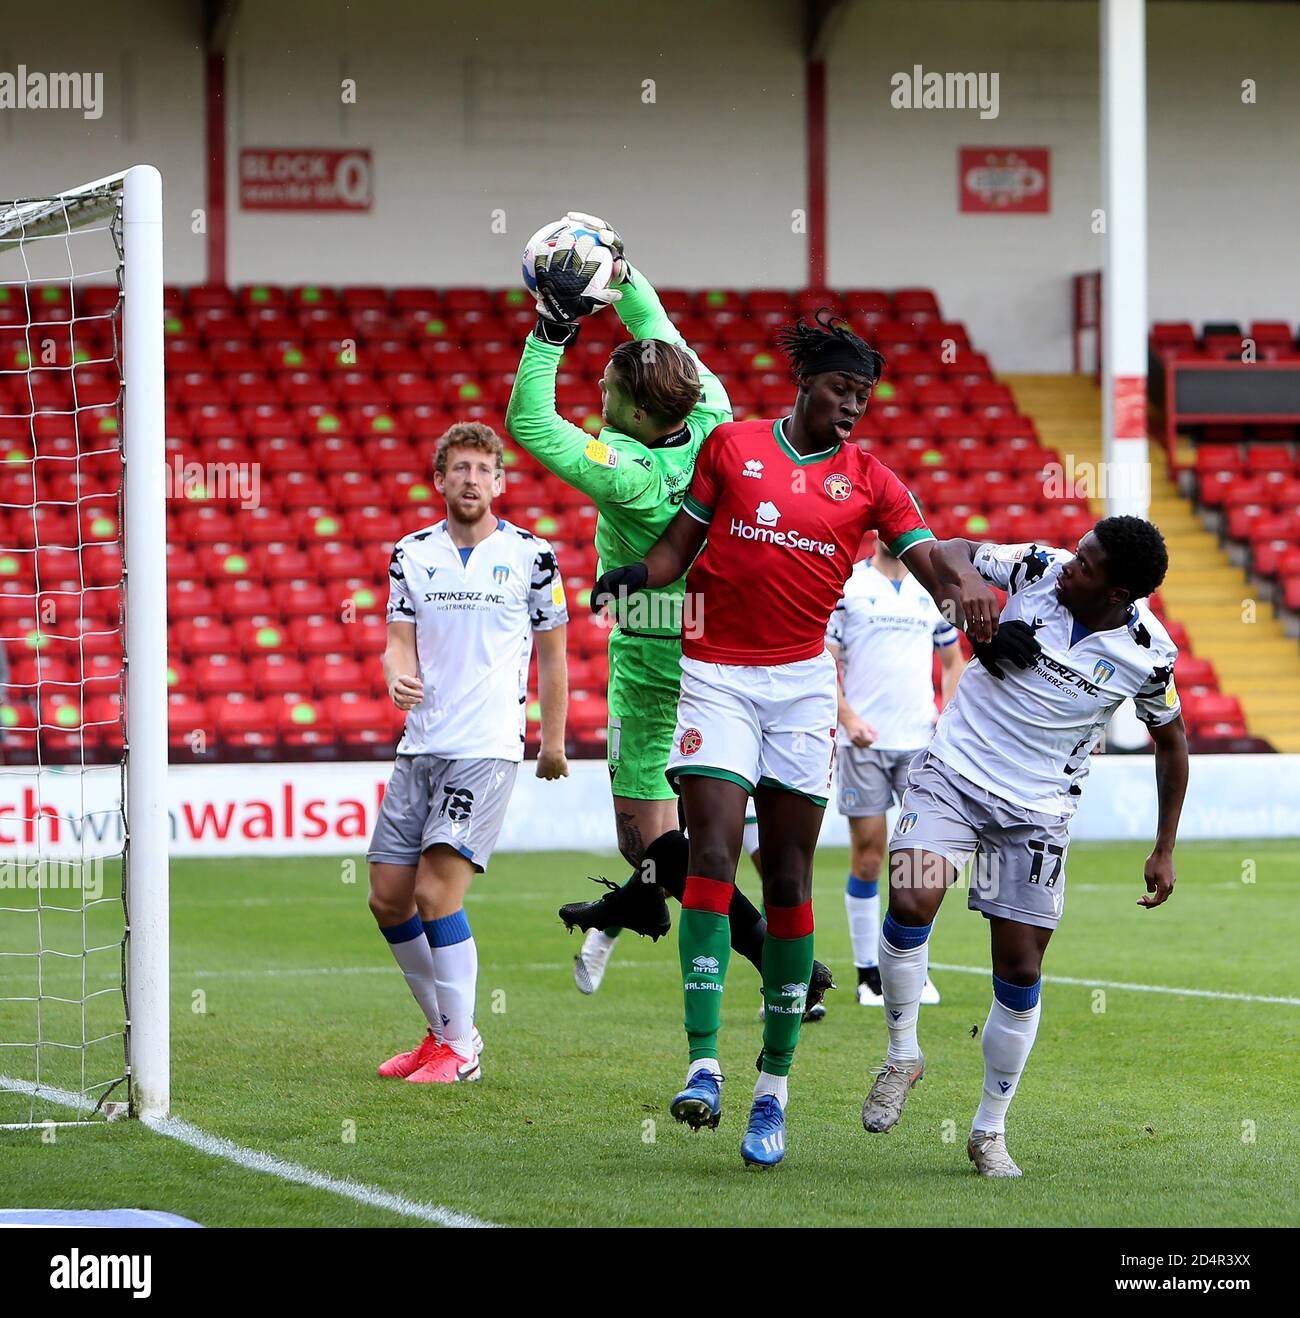 10th October 2020; Bescot Stadium, Walsall, West Midlands, England; English Football League Two, Walsall FC versus Colchester United; Elijah Debayo of Walsall attacks the goal Stock Photo